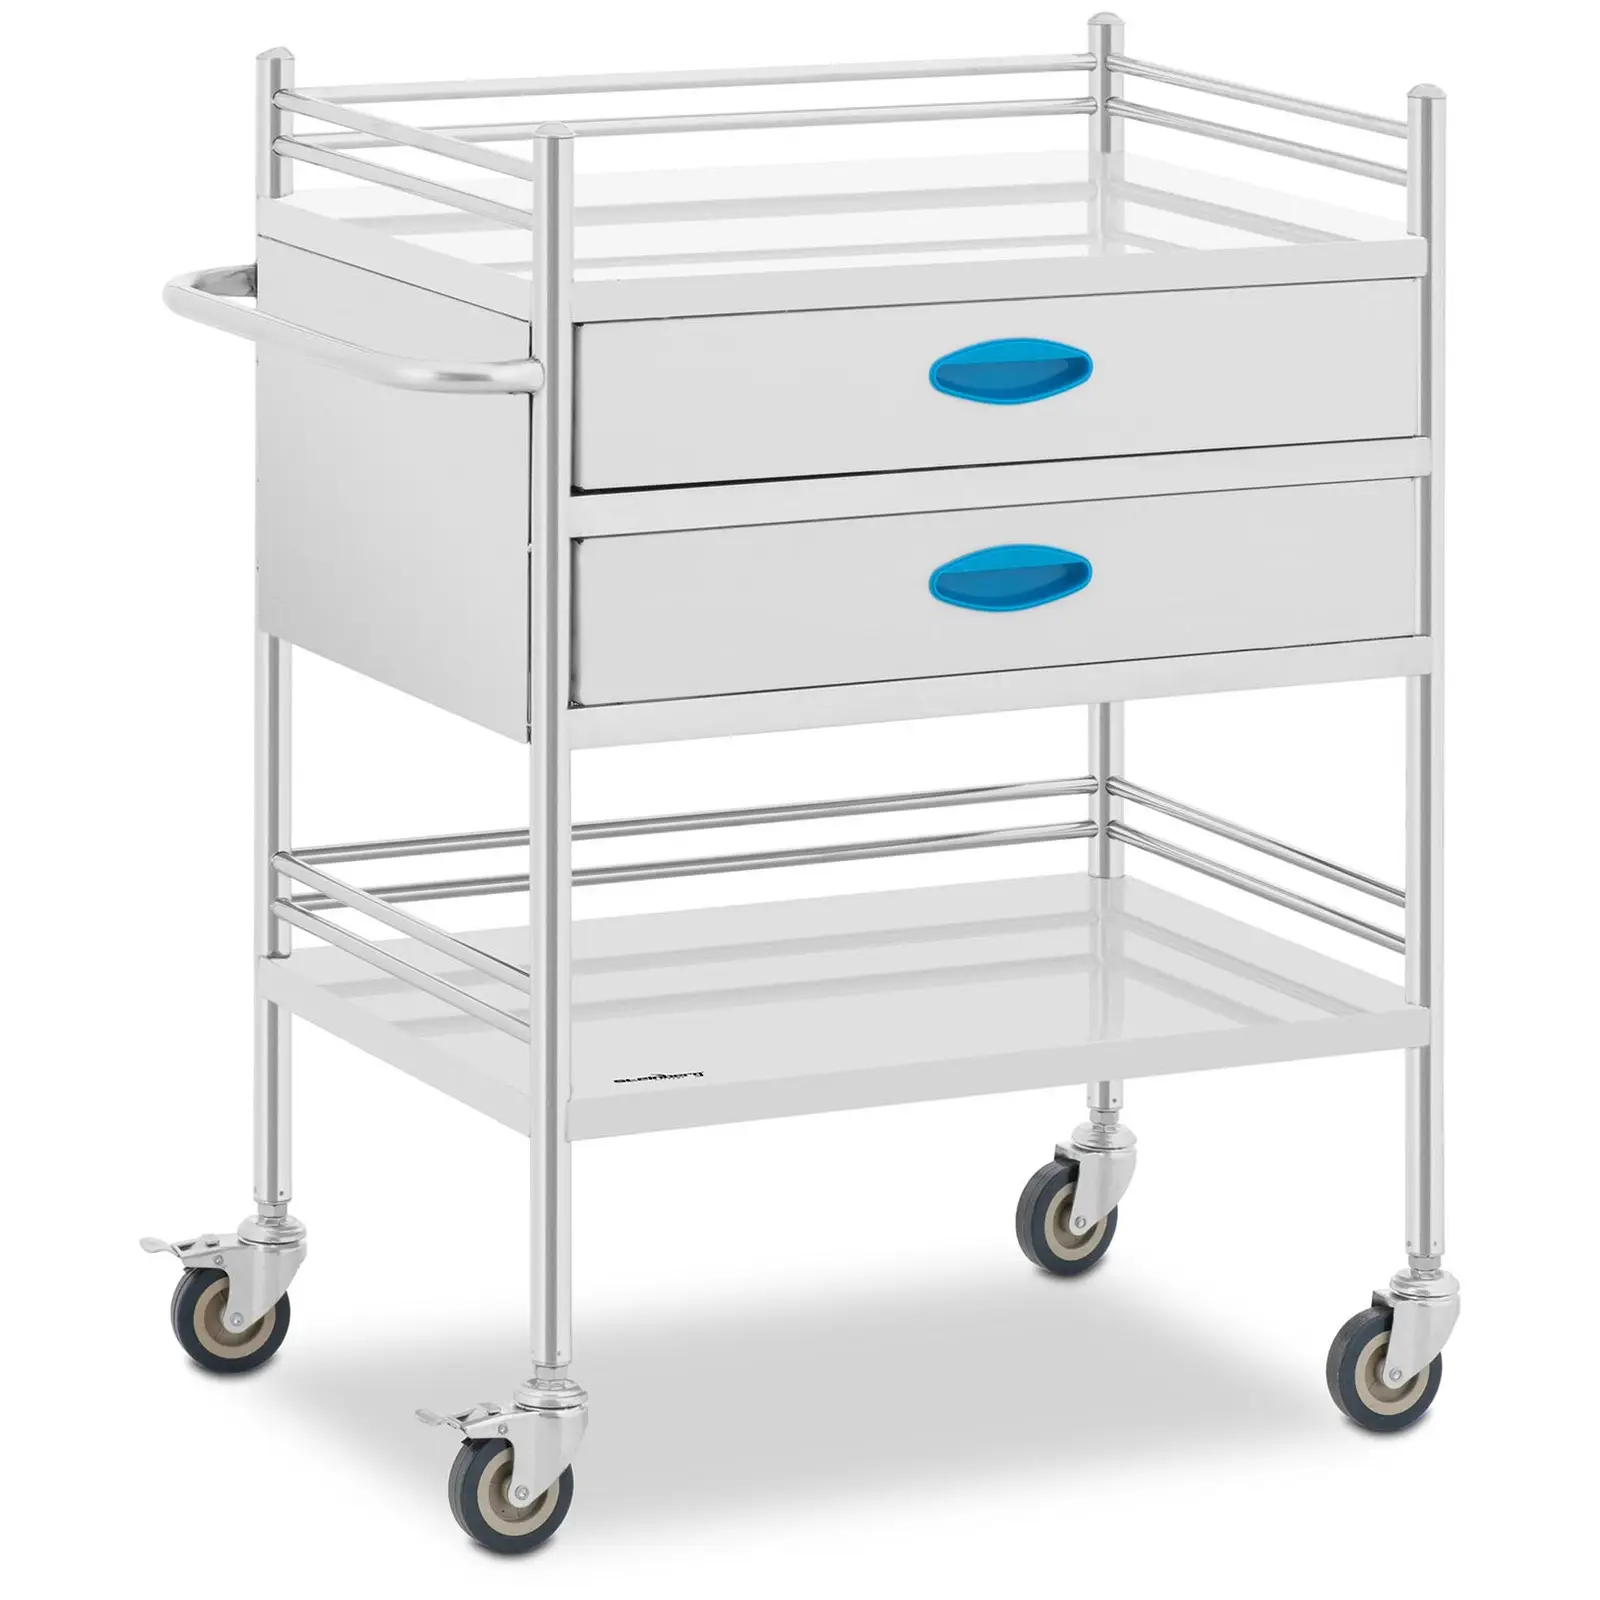 Factory second Laboratory Trolley - stainless steel - 2 shelves each 60 x 41 x 28 cm - 2 drawers - 40 kg